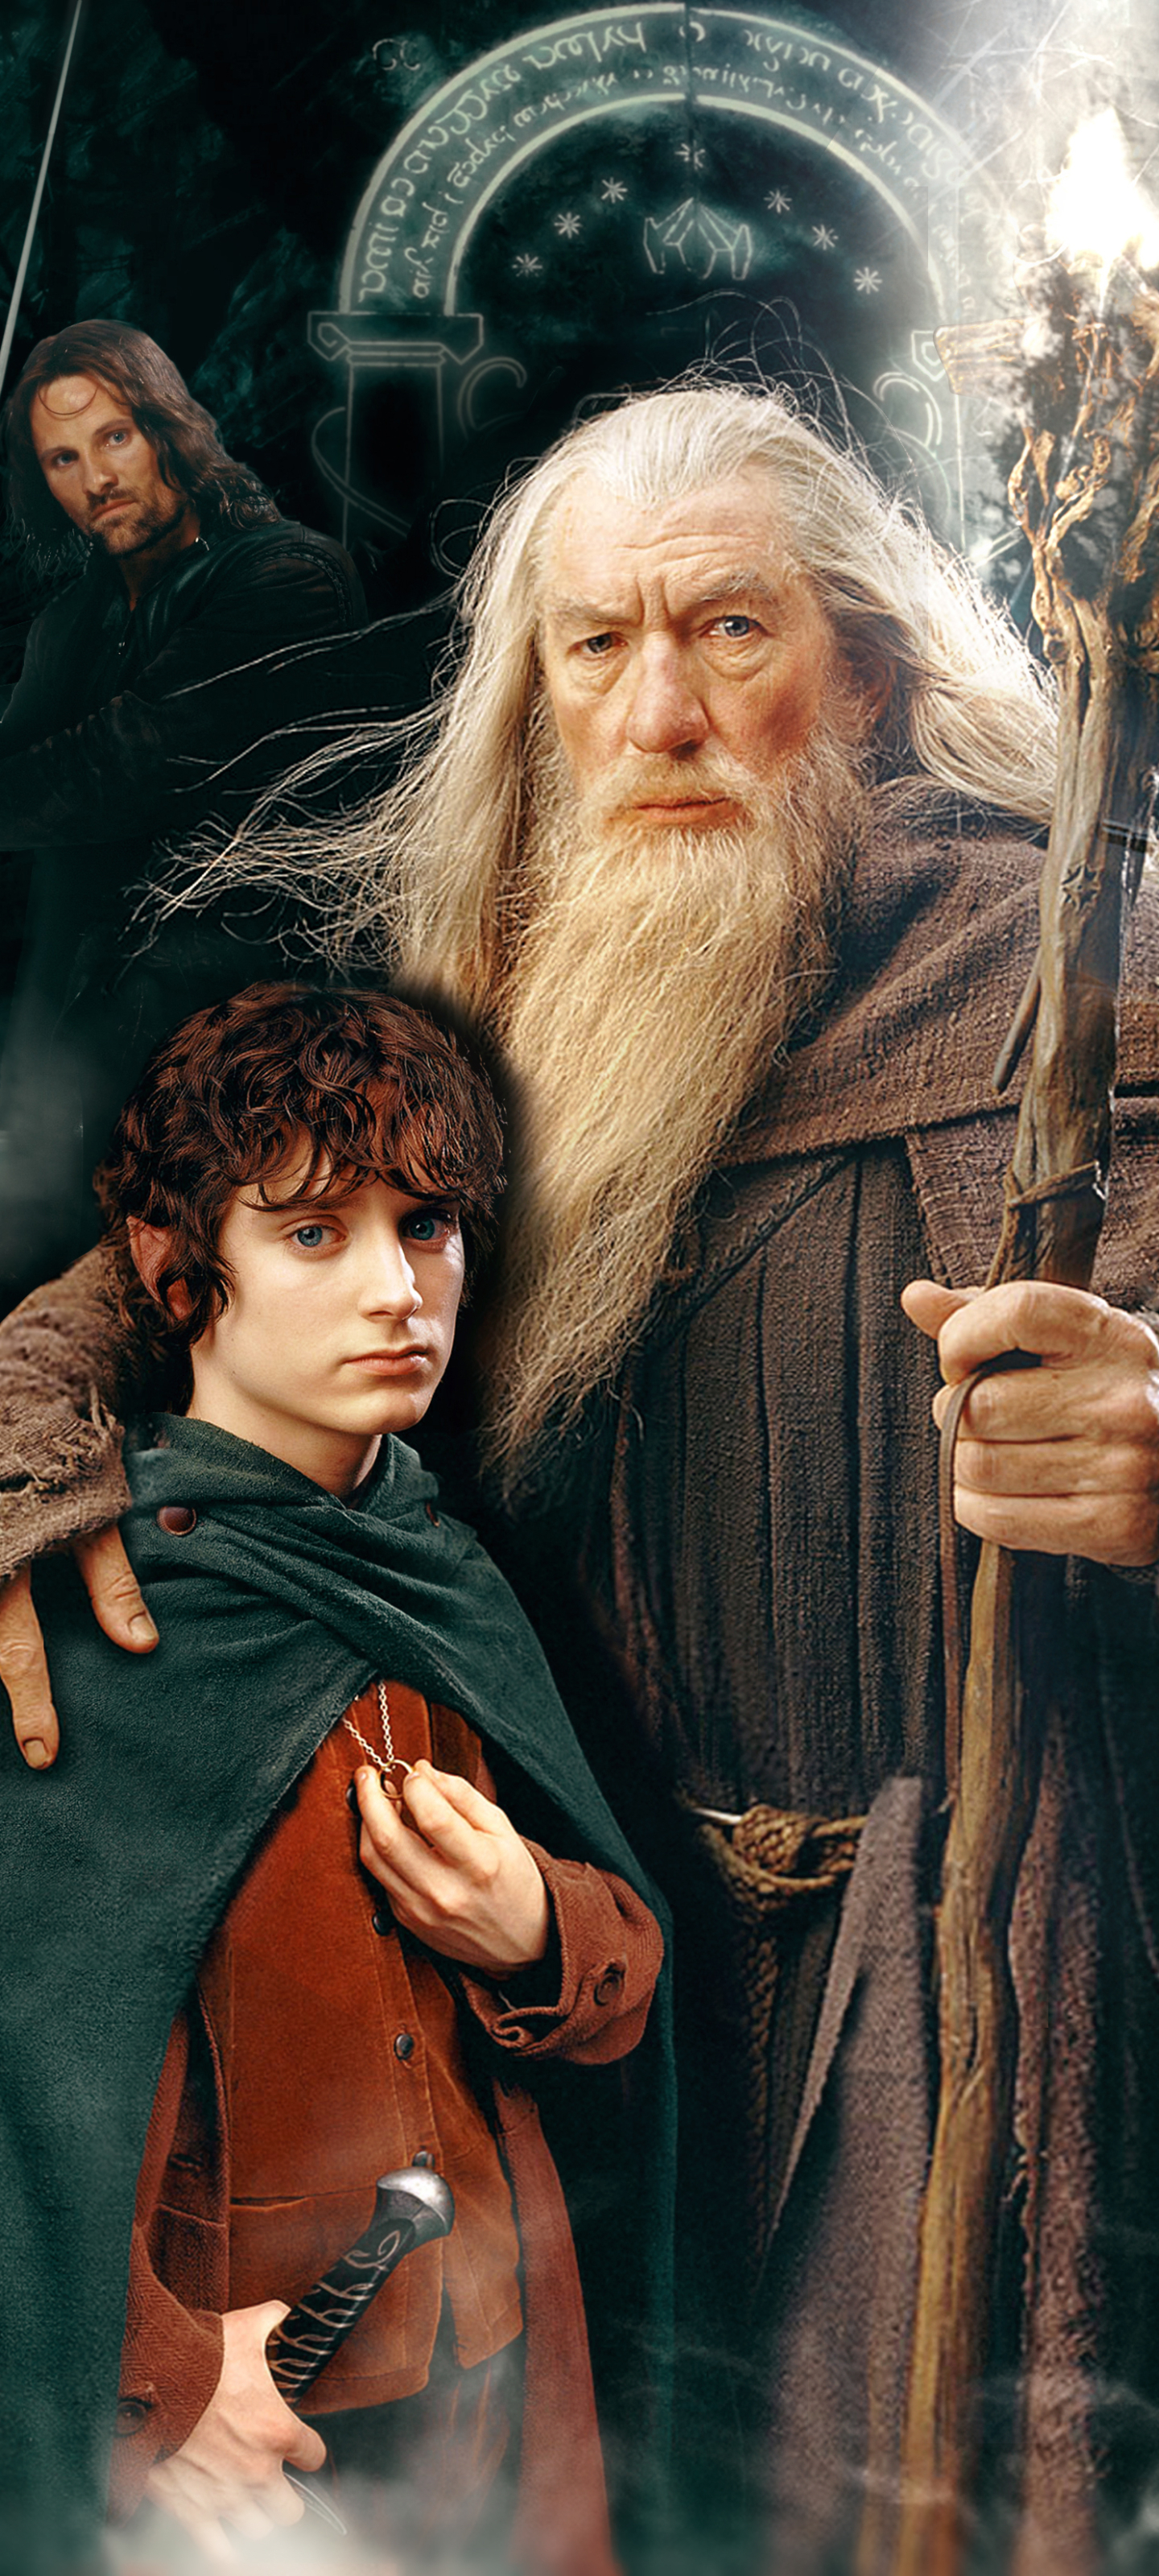 movie, the lord of the rings, gandalf, lord of the rings, frodo baggins